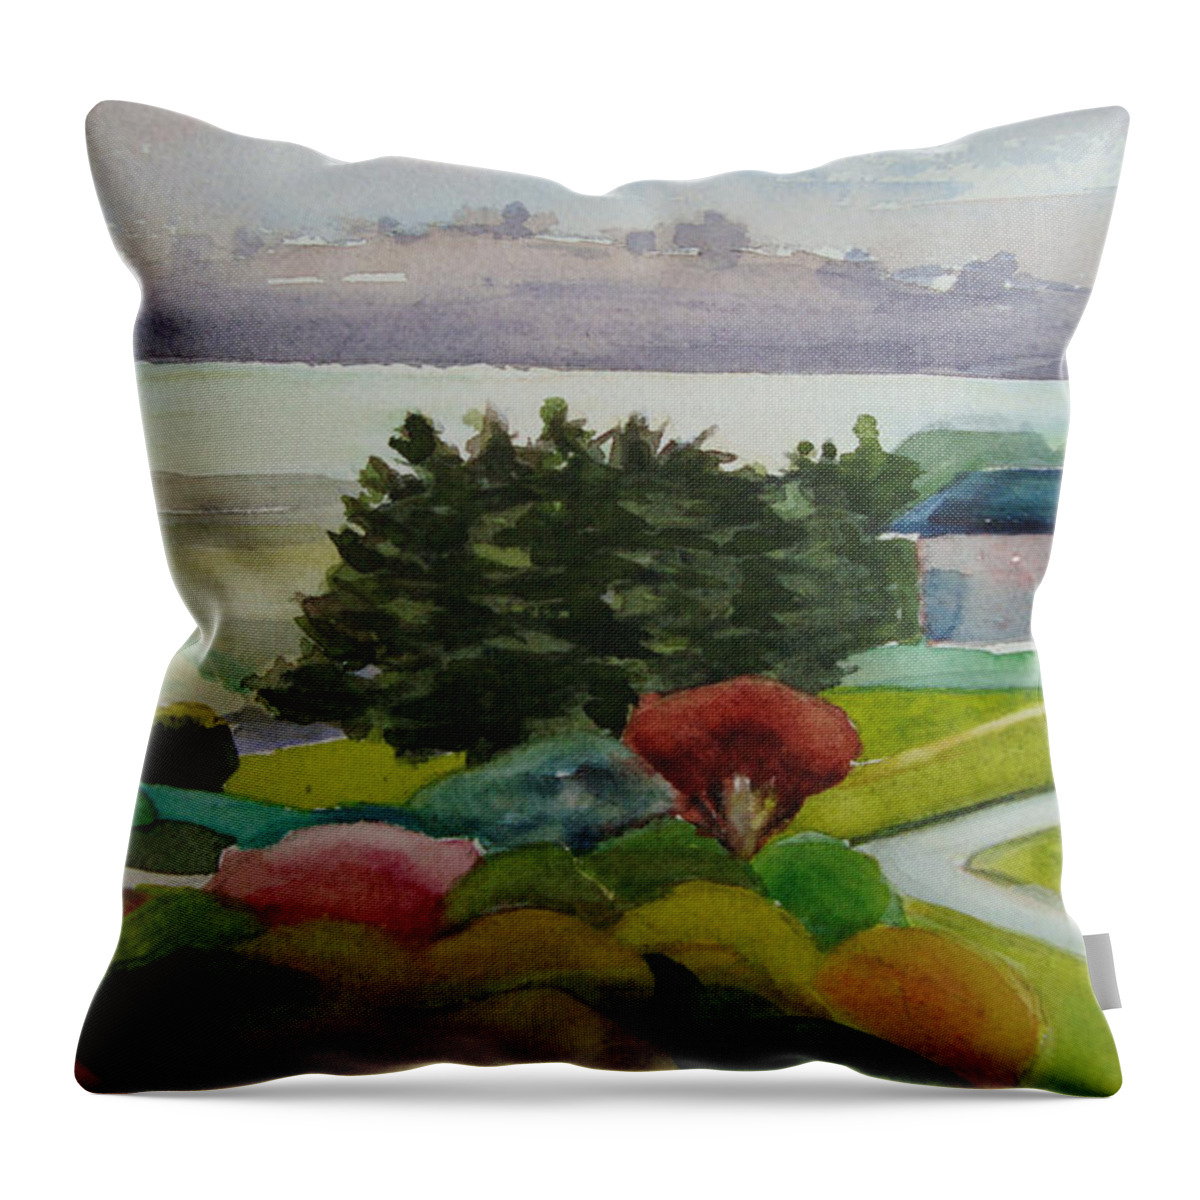 Landscape Throw Pillow featuring the painting Bodega by Karen Coggeshall